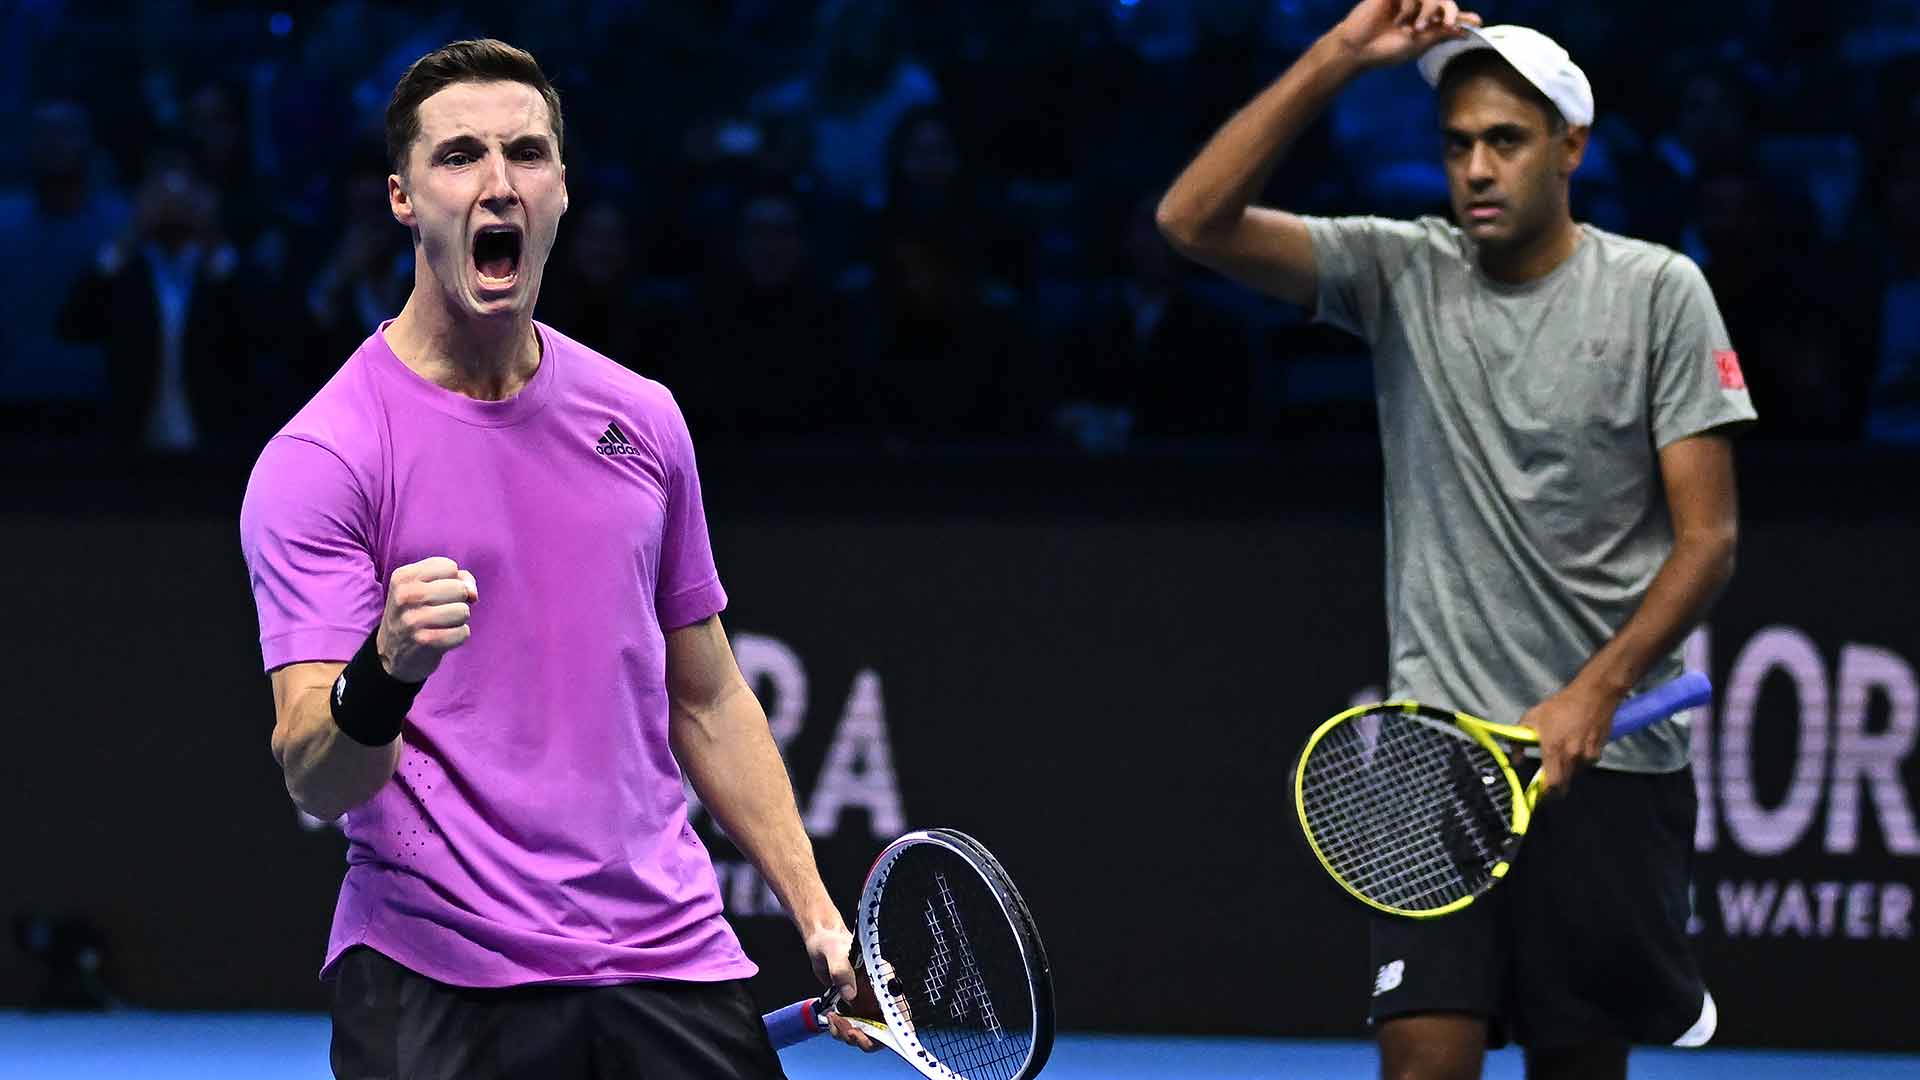 Joe Salisbury and Rajeev Ram play for a spot in the Nitto ATP Finals title match.